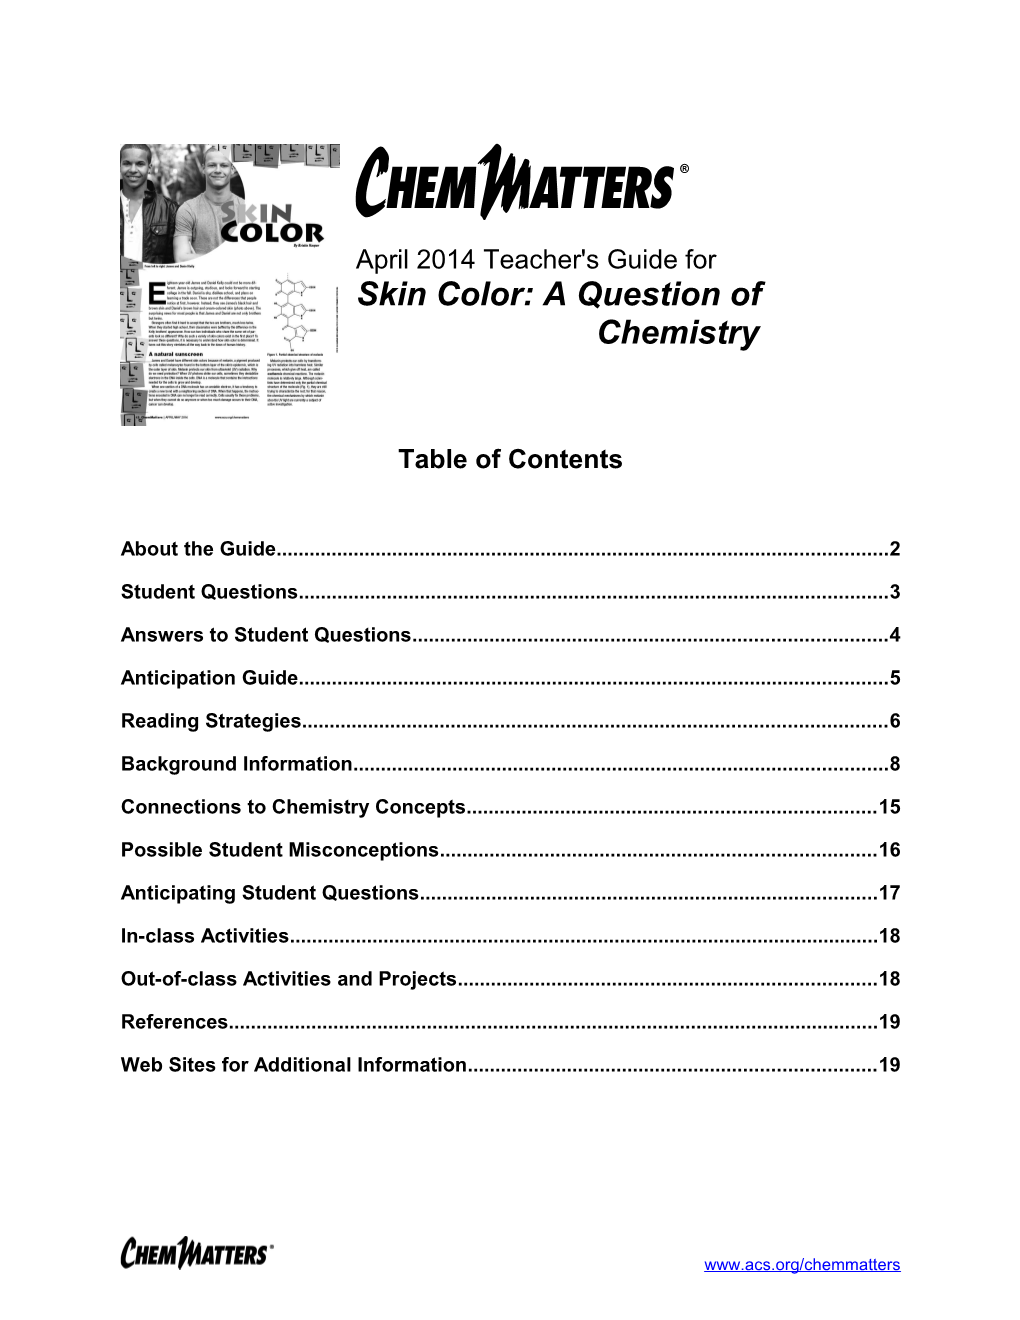 Skin Color: a Question of Chemistry